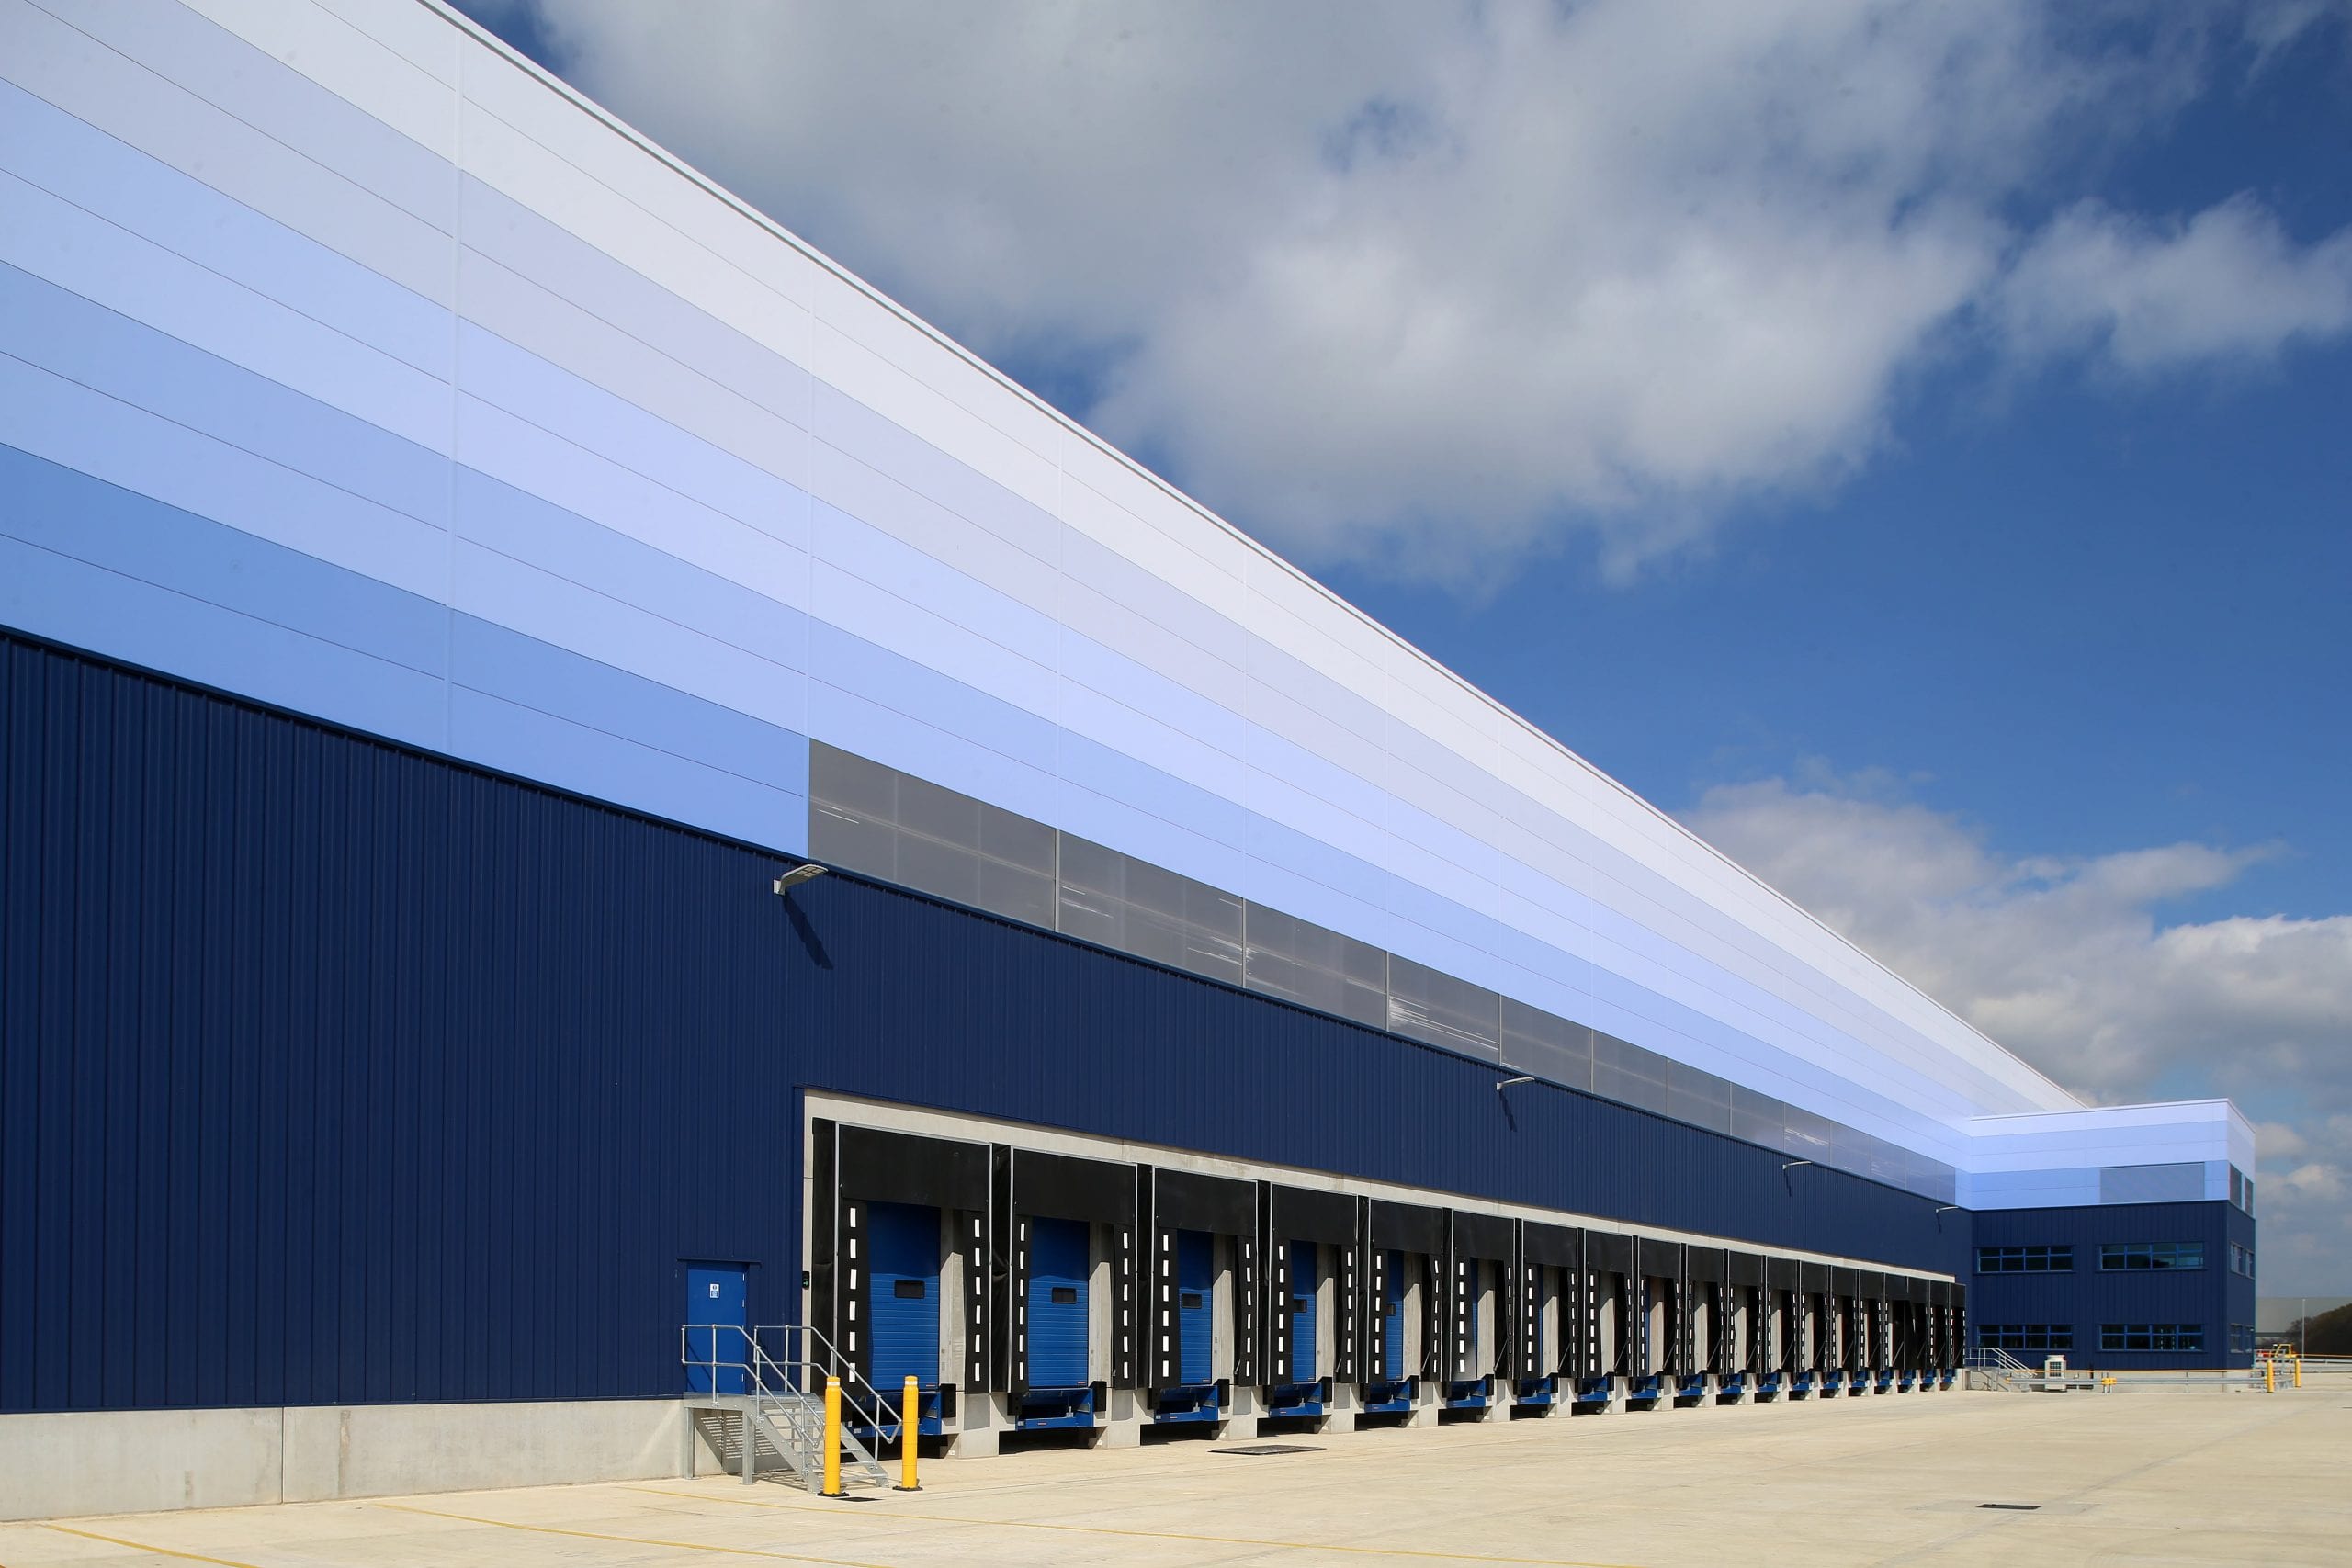 GLP logistics centre in Doncaster showing blue and white colour scheme of exterior walls and multiple empty loading bays.